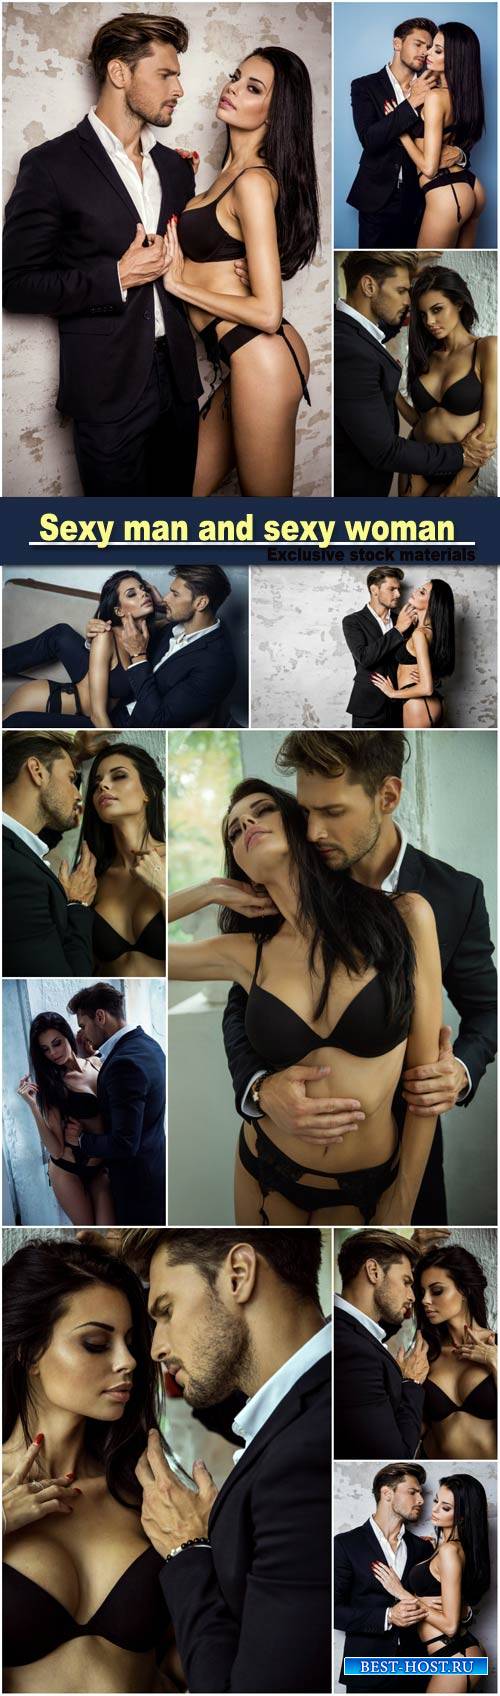 Portrait of sexy man in black suit touching sexy woman in lingerie